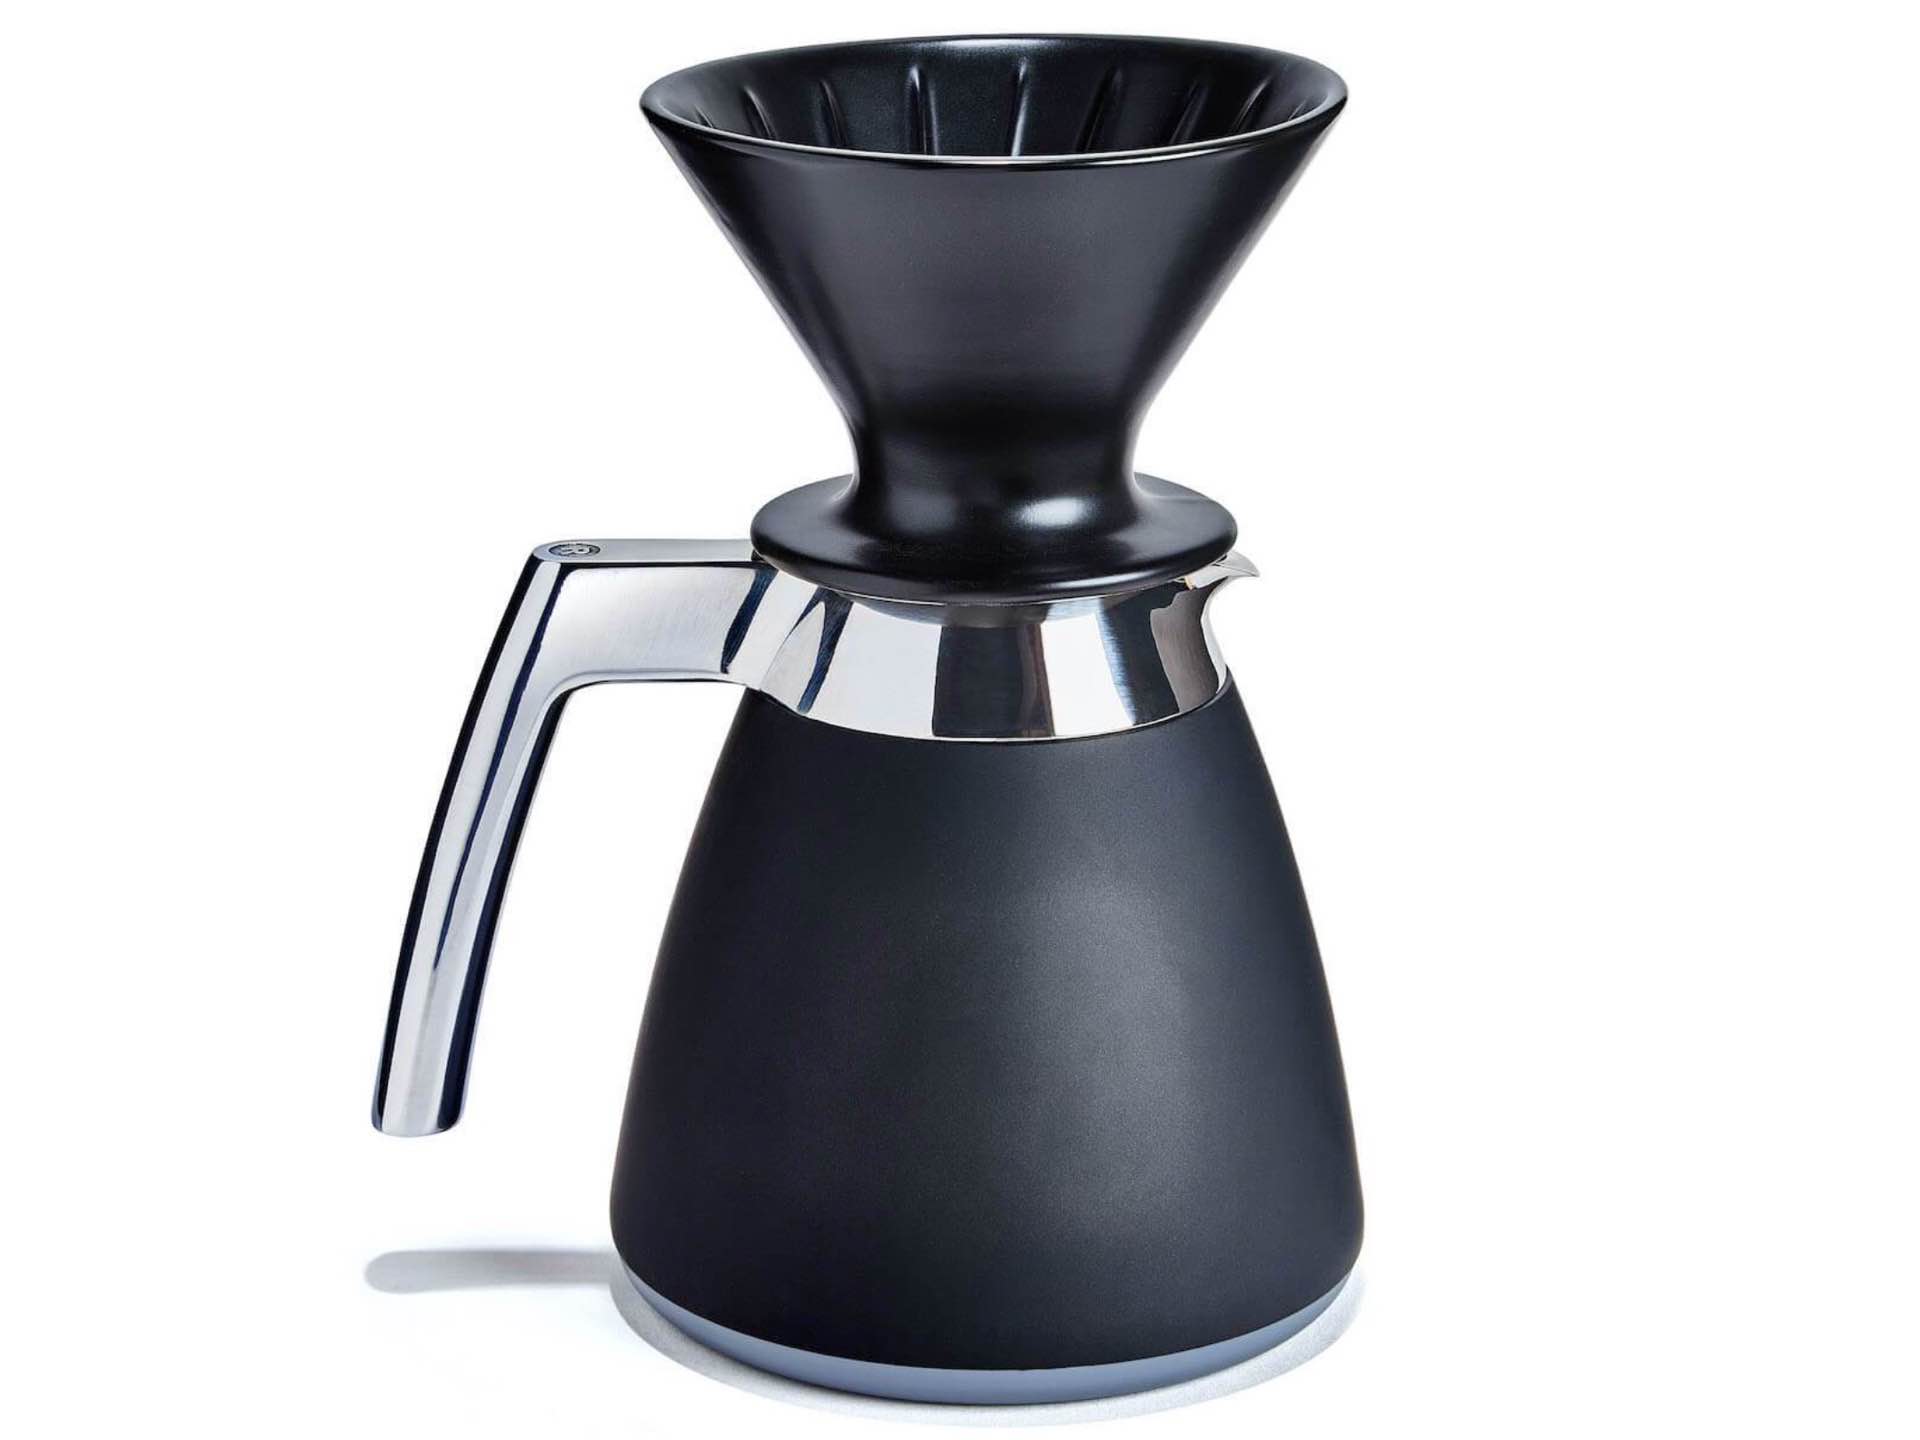 ratio-eight-thermal-carafe-porcelain-pour-over-dripper